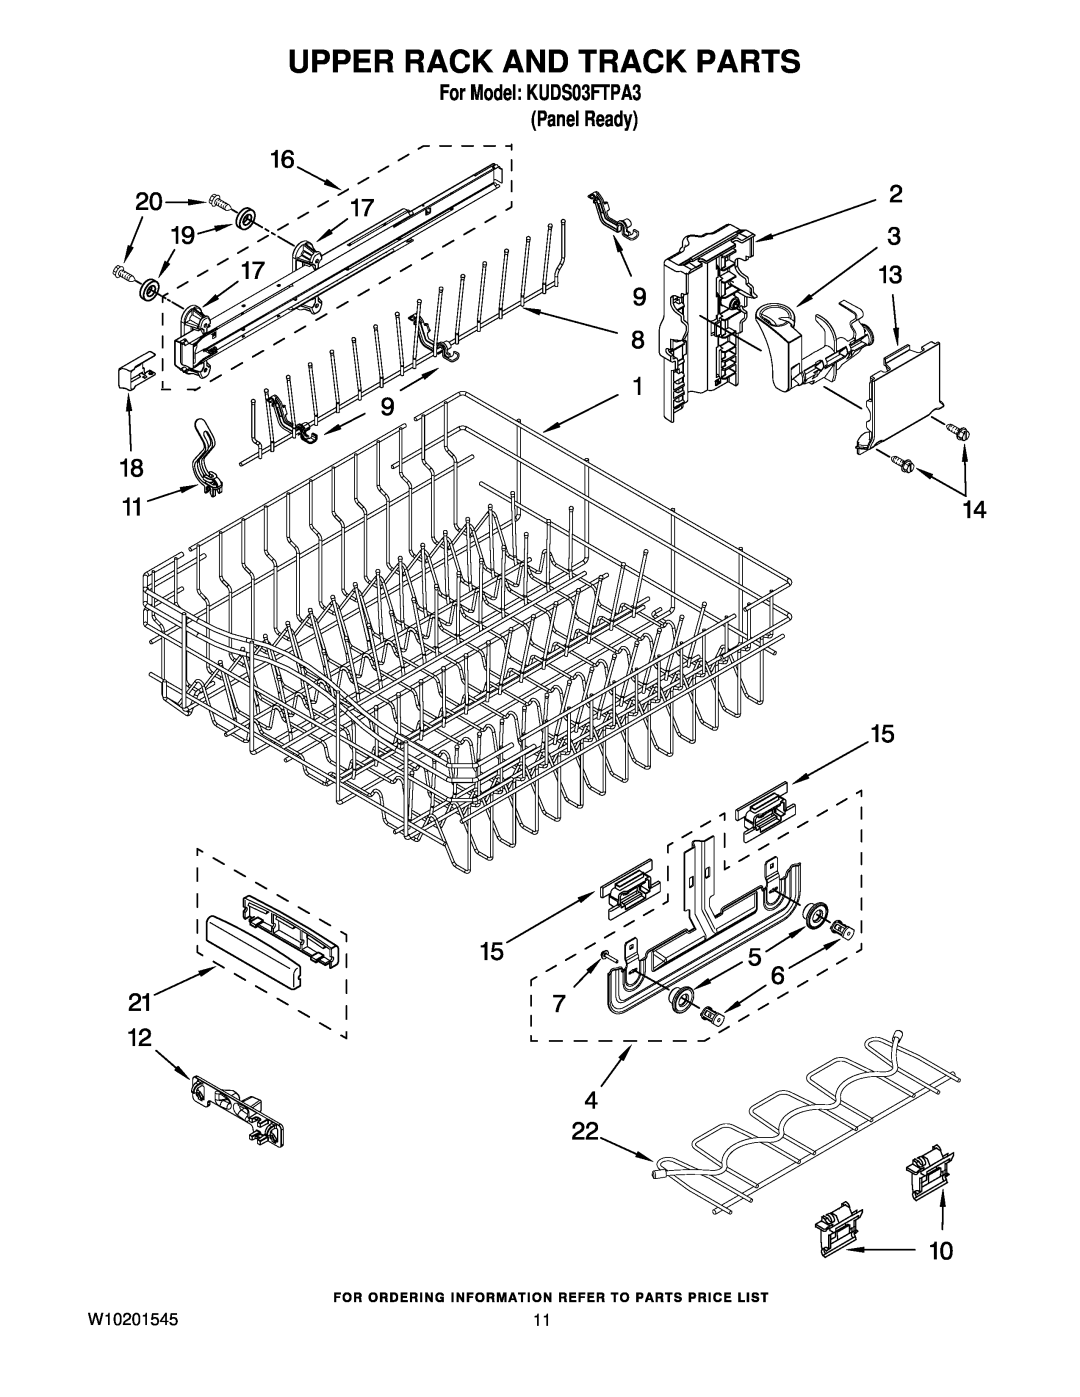 KitchenAid manual Upper Rack And Track Parts, W10201545, For Model KUDS03FTPA3 Panel Ready 